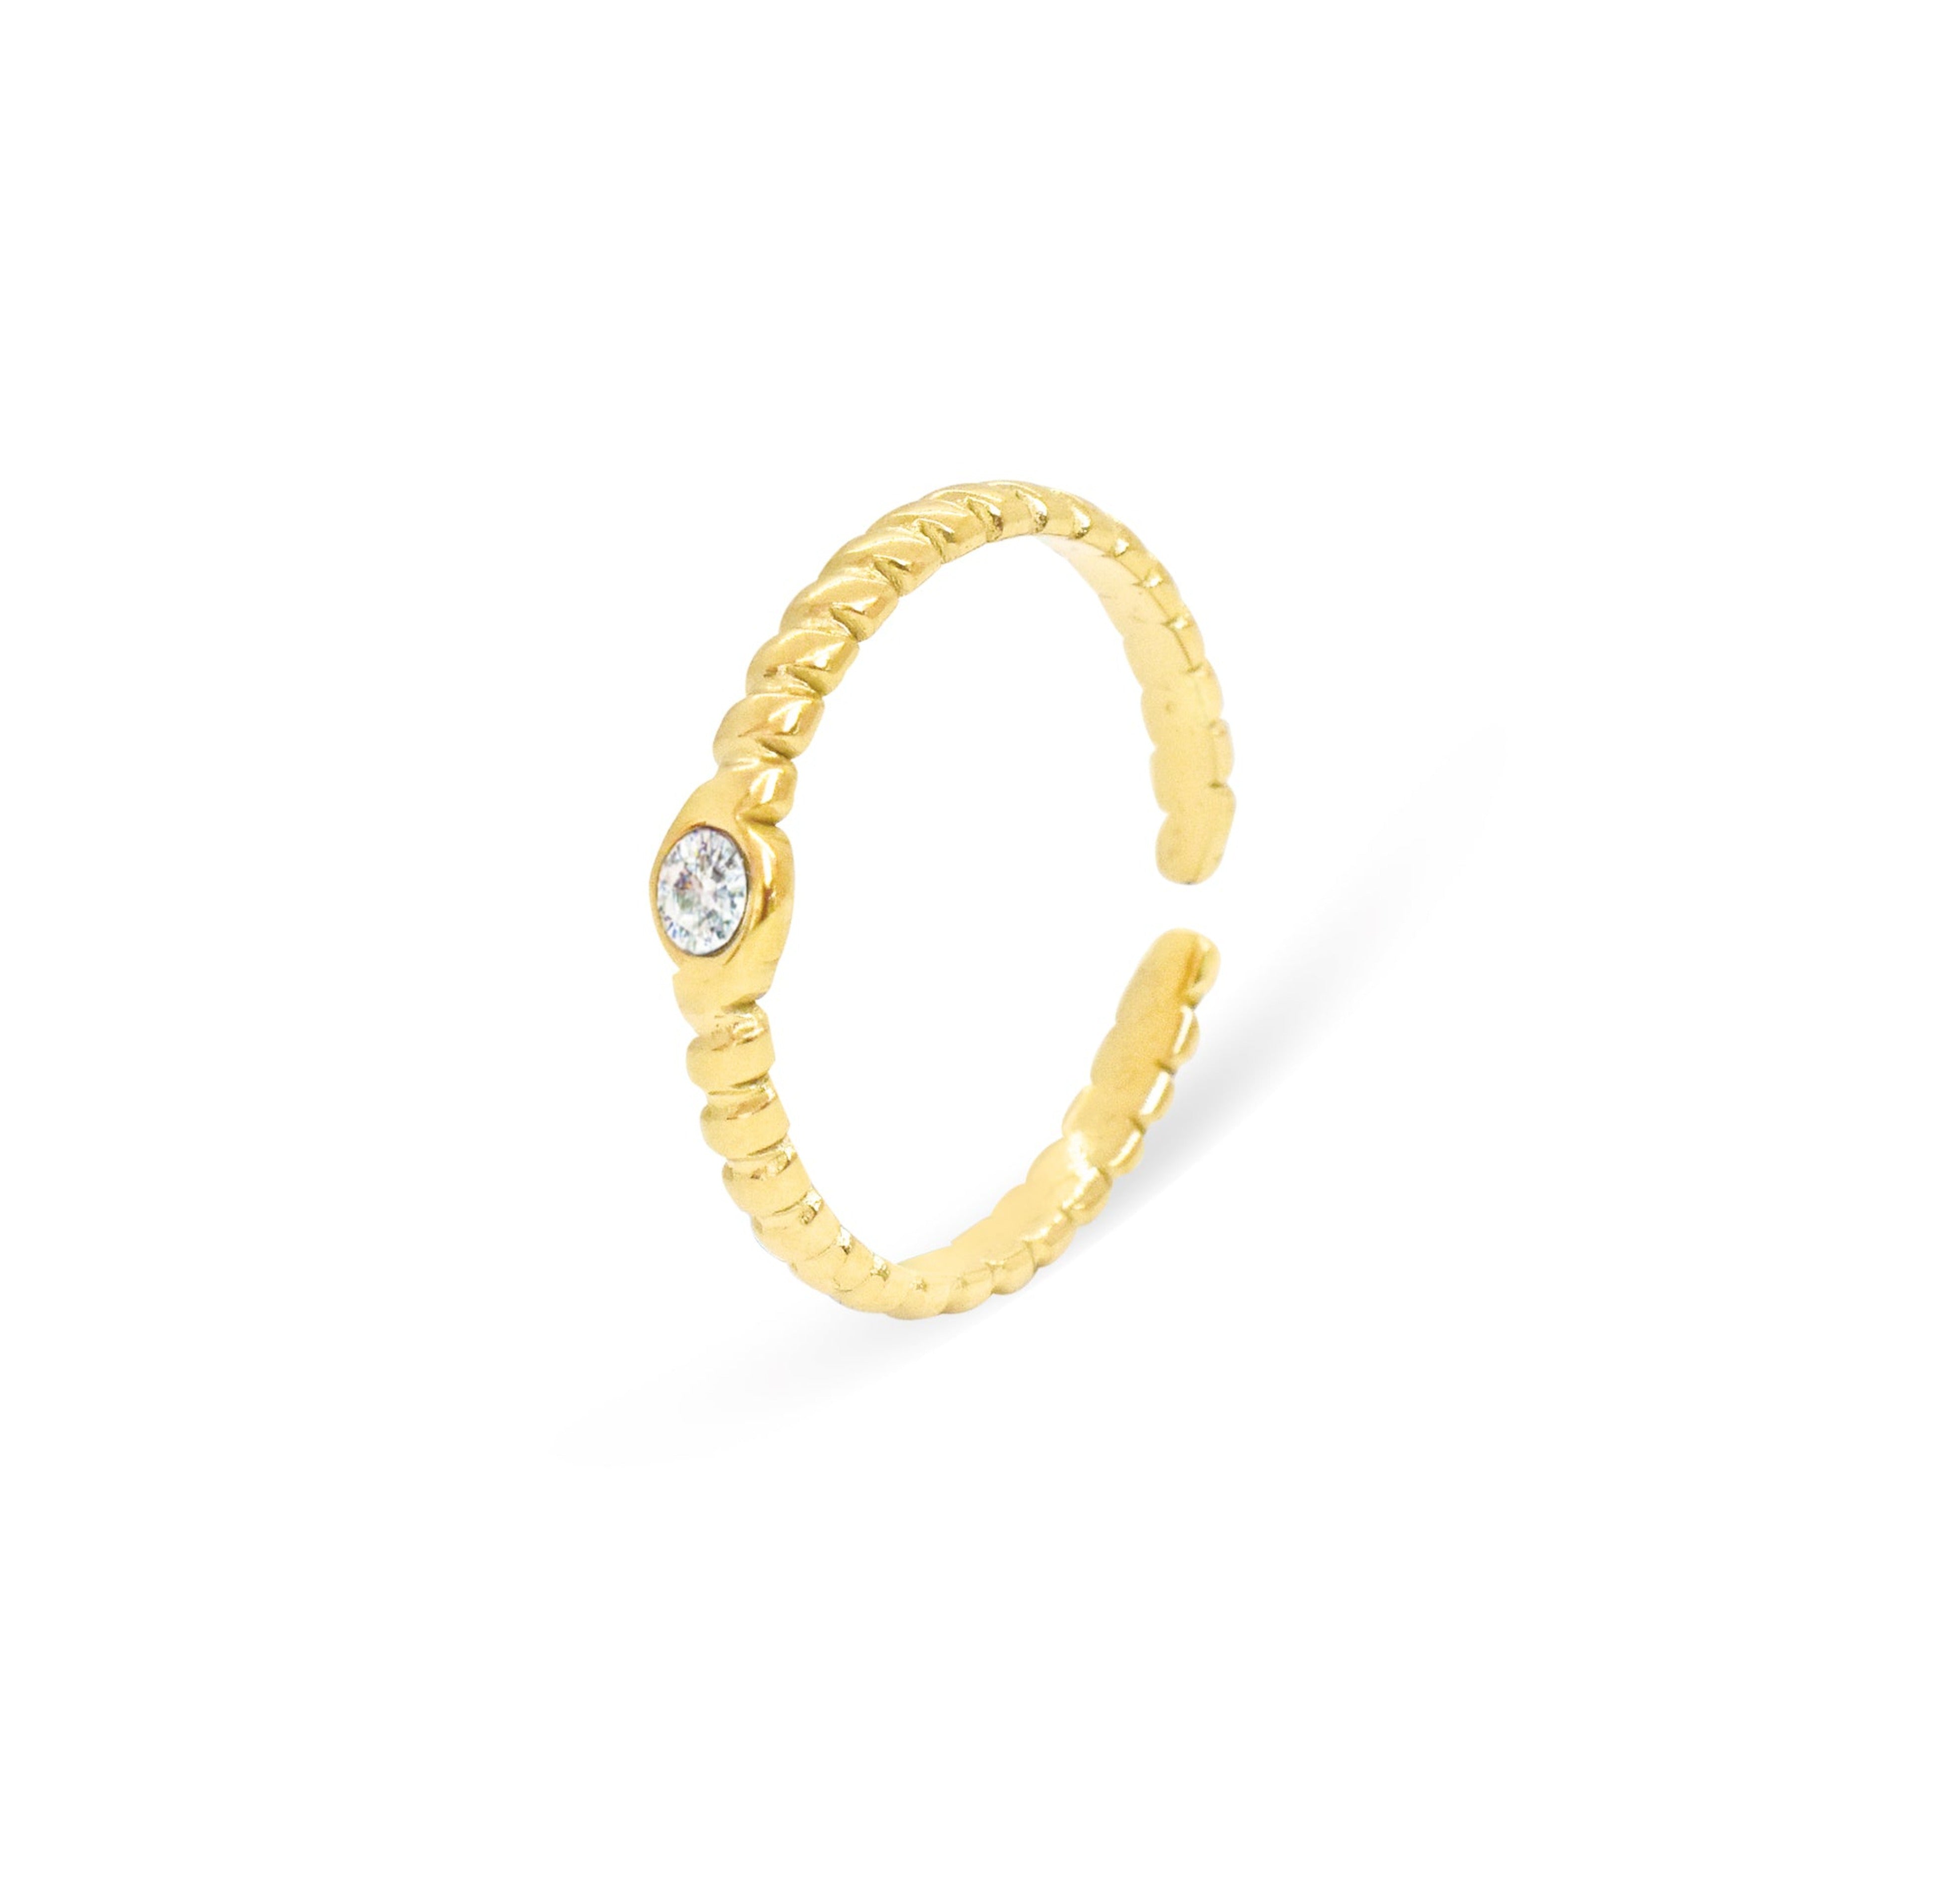 Helena gold adjustable solitaire ring. Gold waterproof jewelry